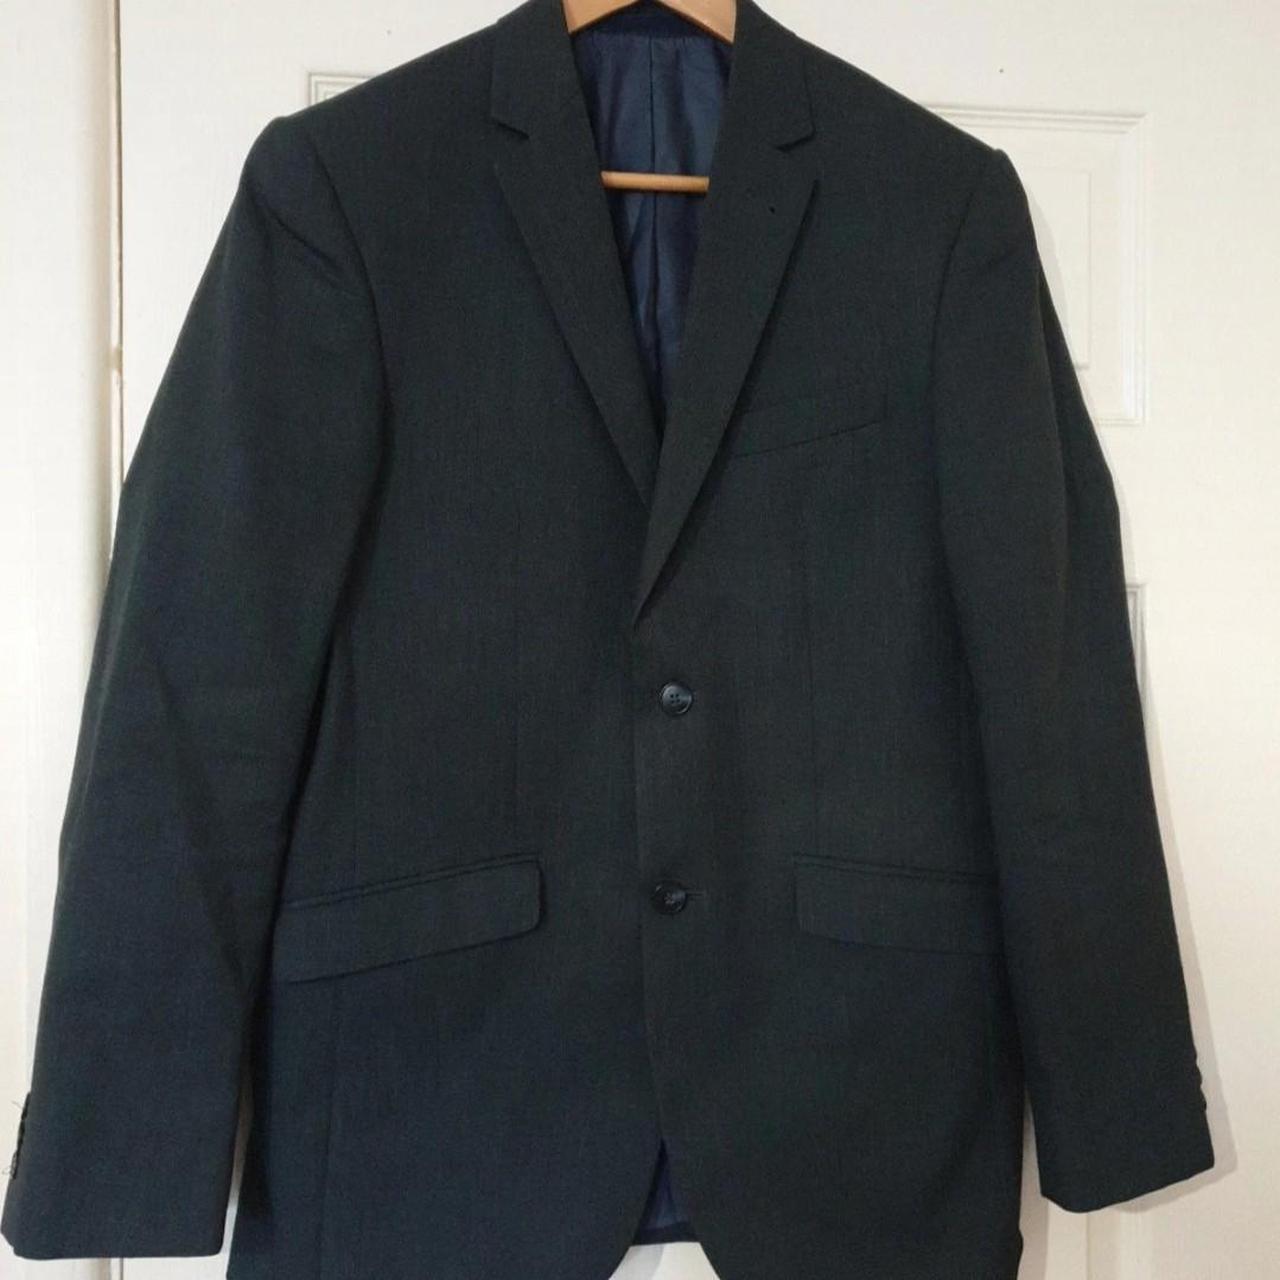 Mens grey suit jacket Size 38R Taylor and Wright... - Depop